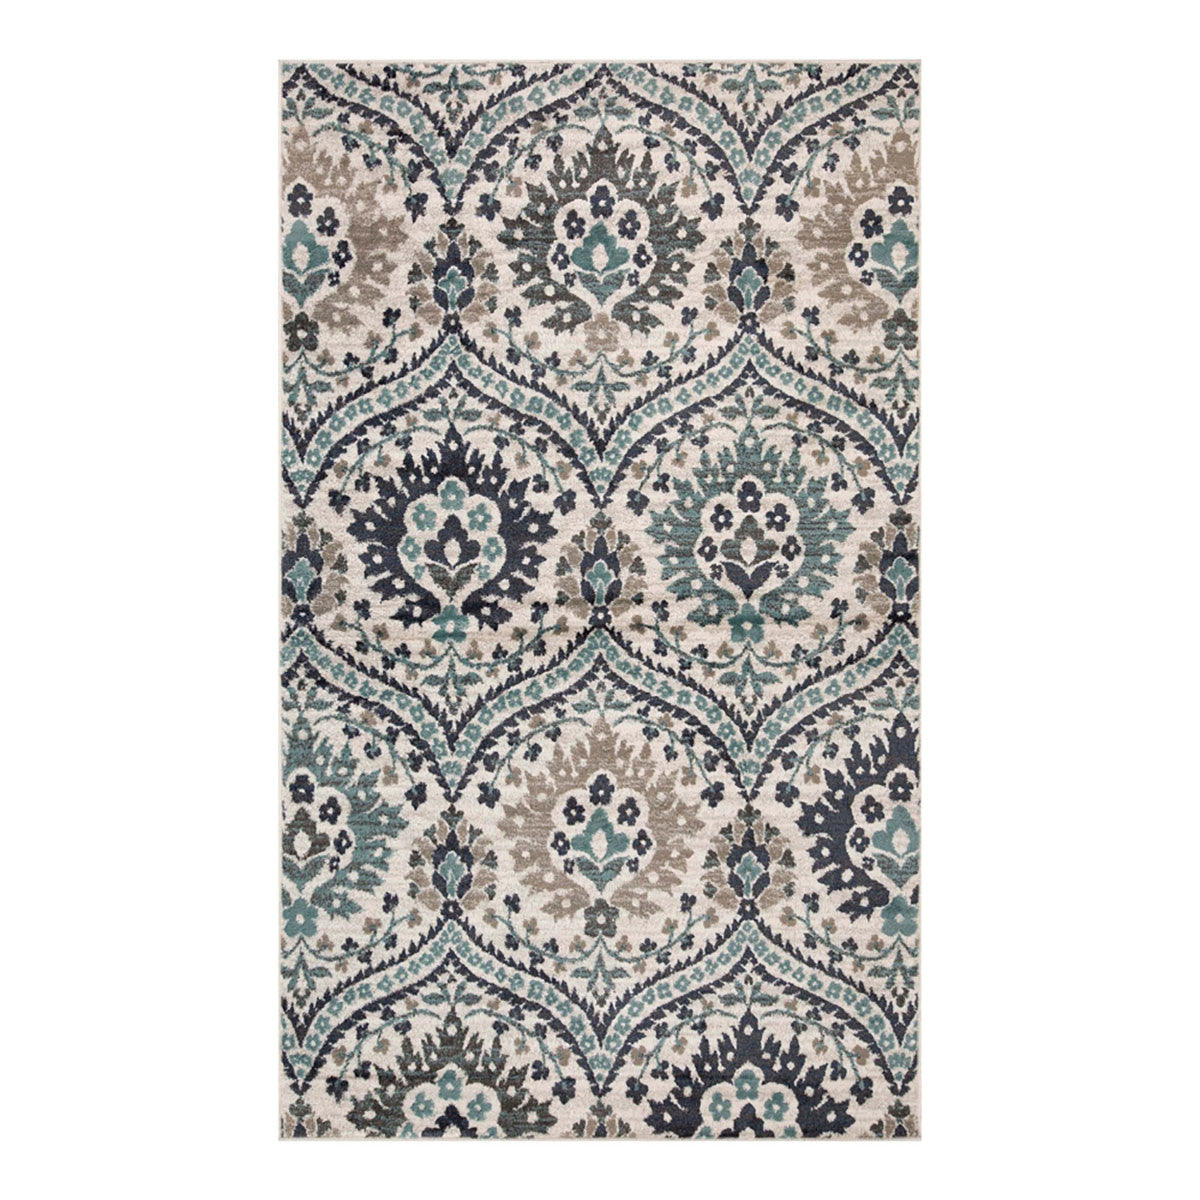 8' X 10' Ivory Blue And Gray Floral Stain Resistant Area Rug